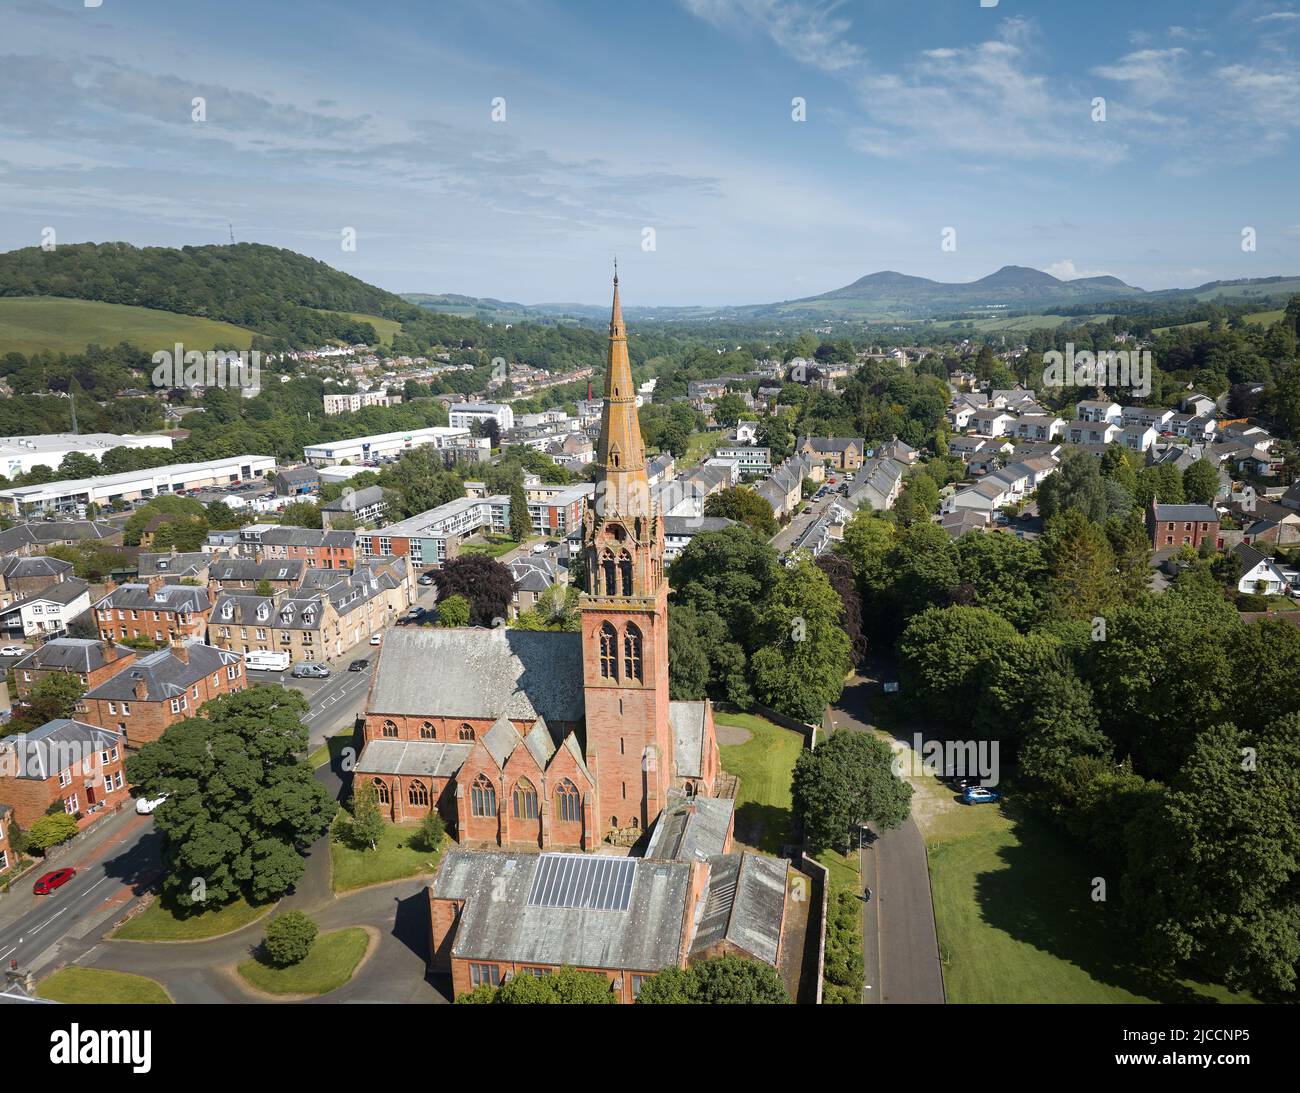 Aerial shot of Galashiels in the Scottish Borders with Old Parish & St Paul’s Church in the foreground. Looking E towards the Eildon Hills. Stock Photo